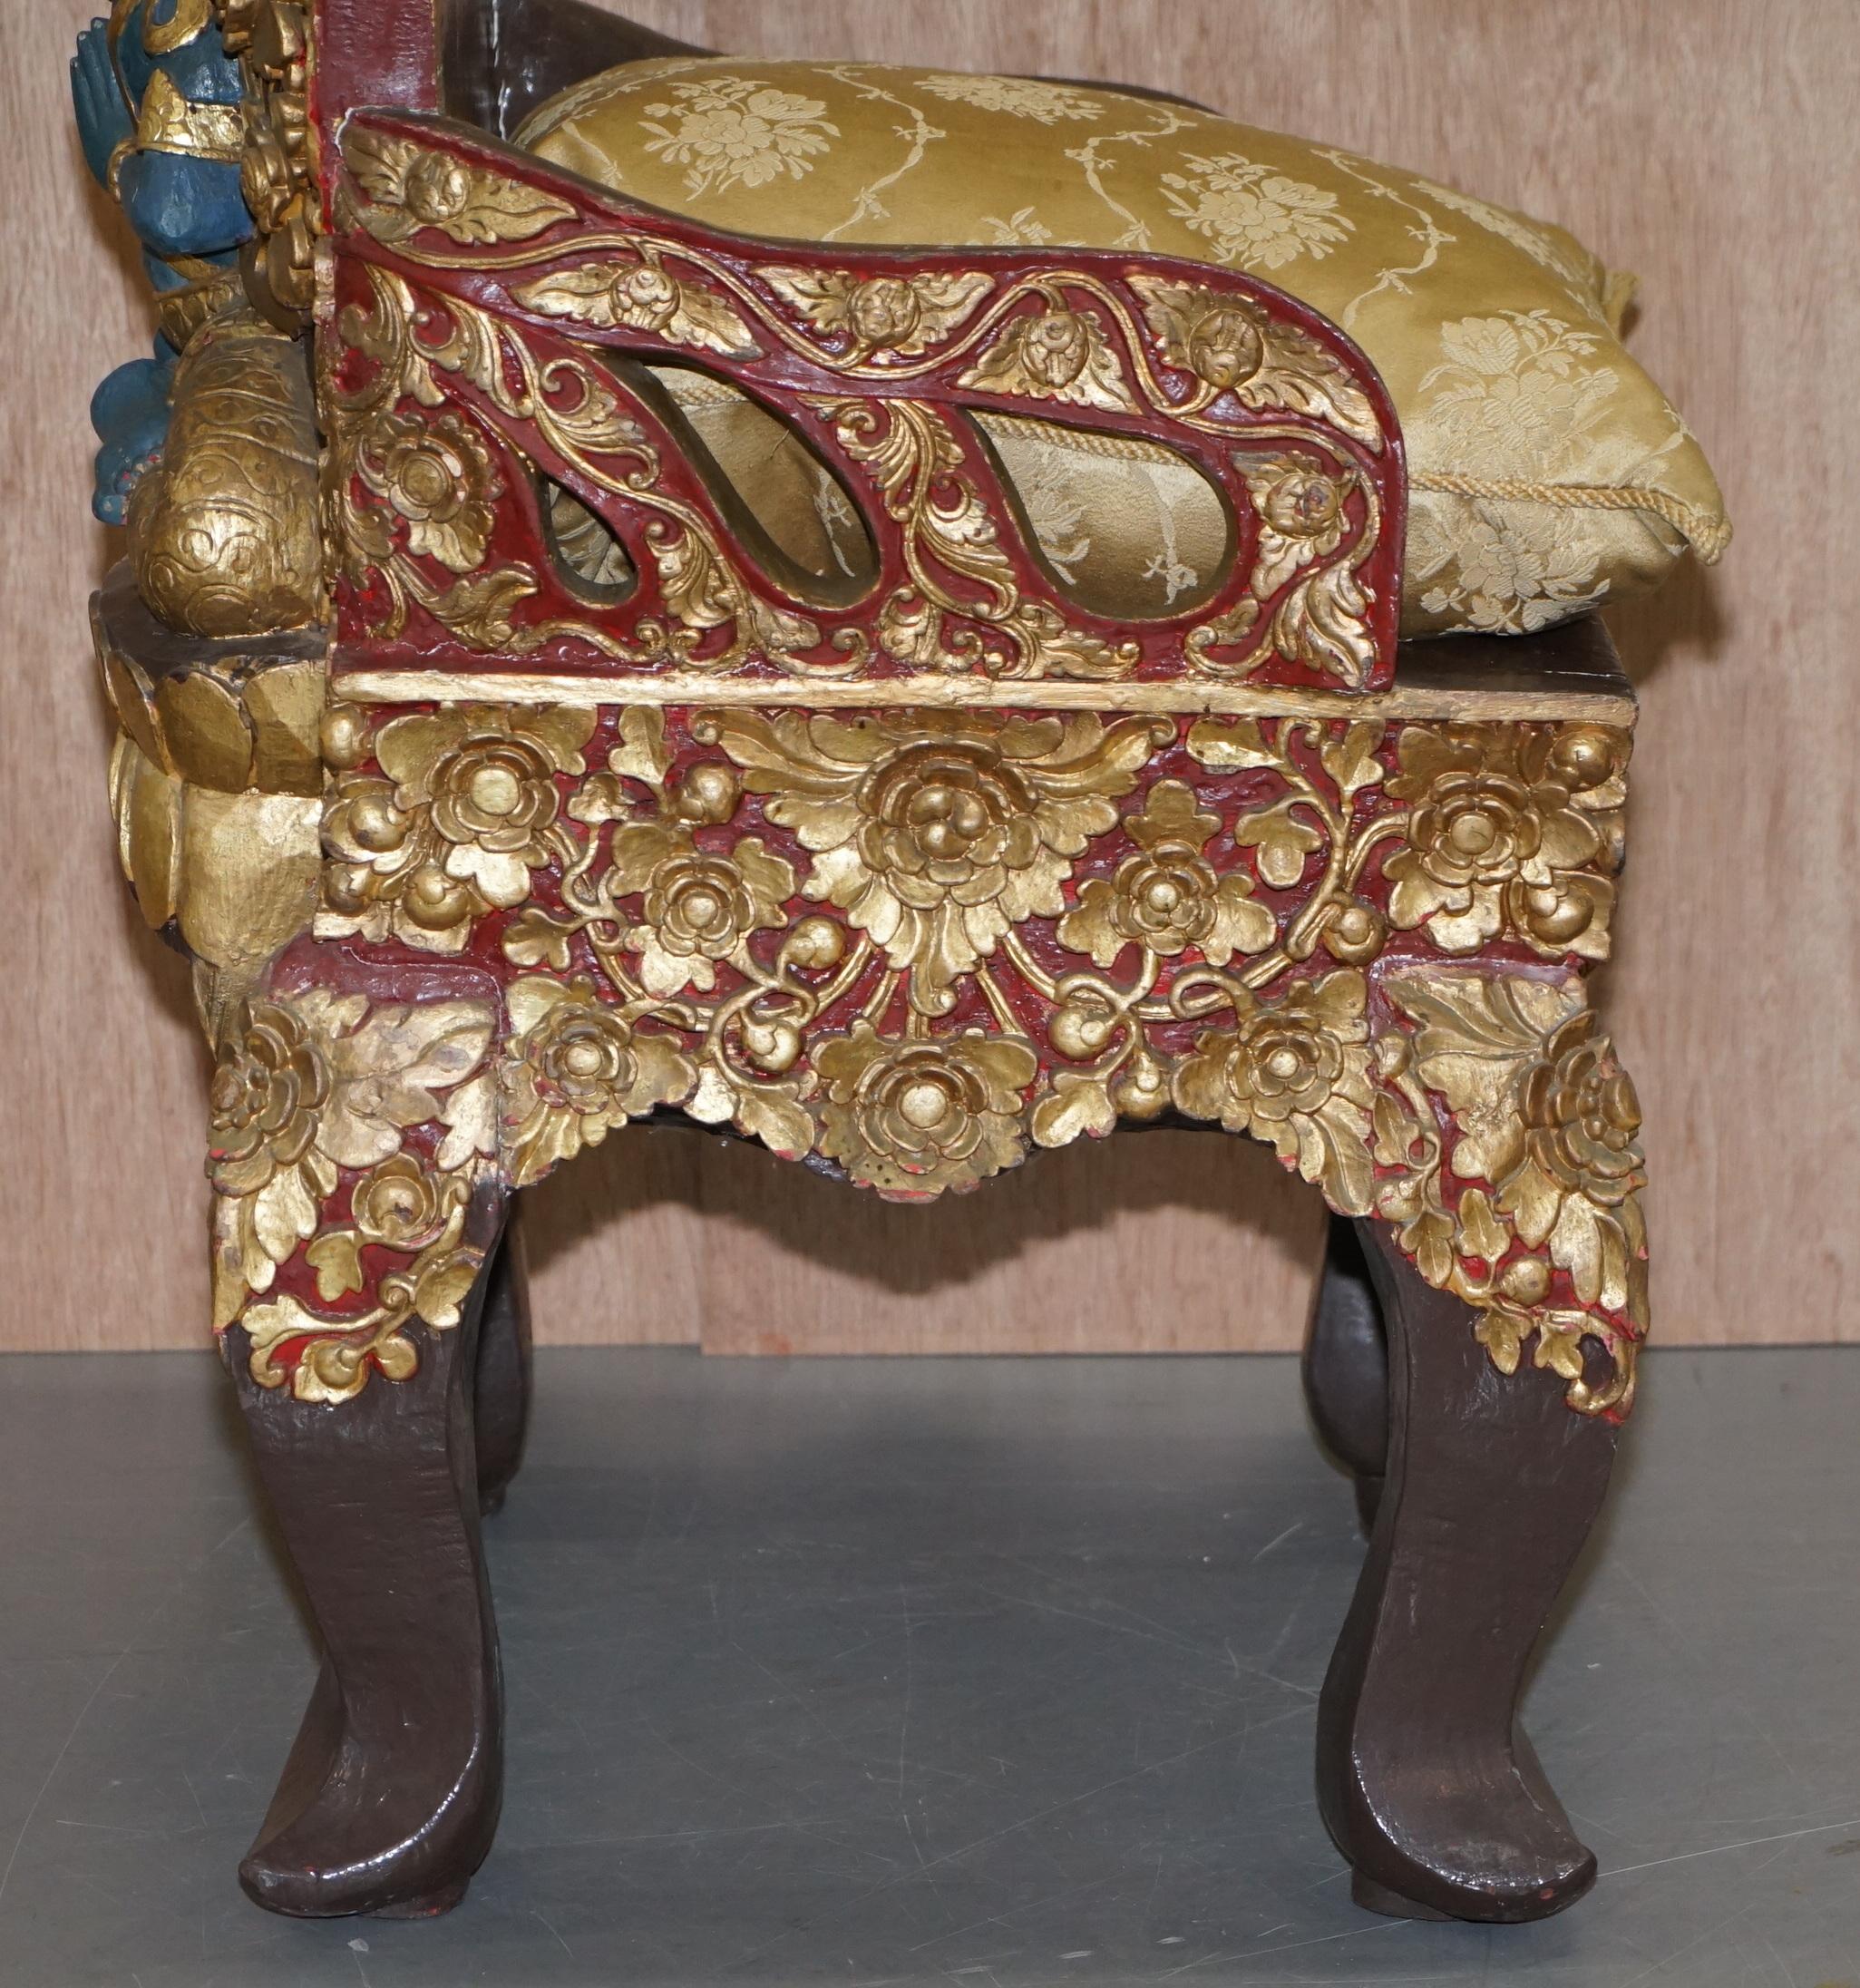 Rare Pair of circa 1900 Tibetan Ceremonial Chairs Nyingma Buddha Carved in Backs For Sale 2